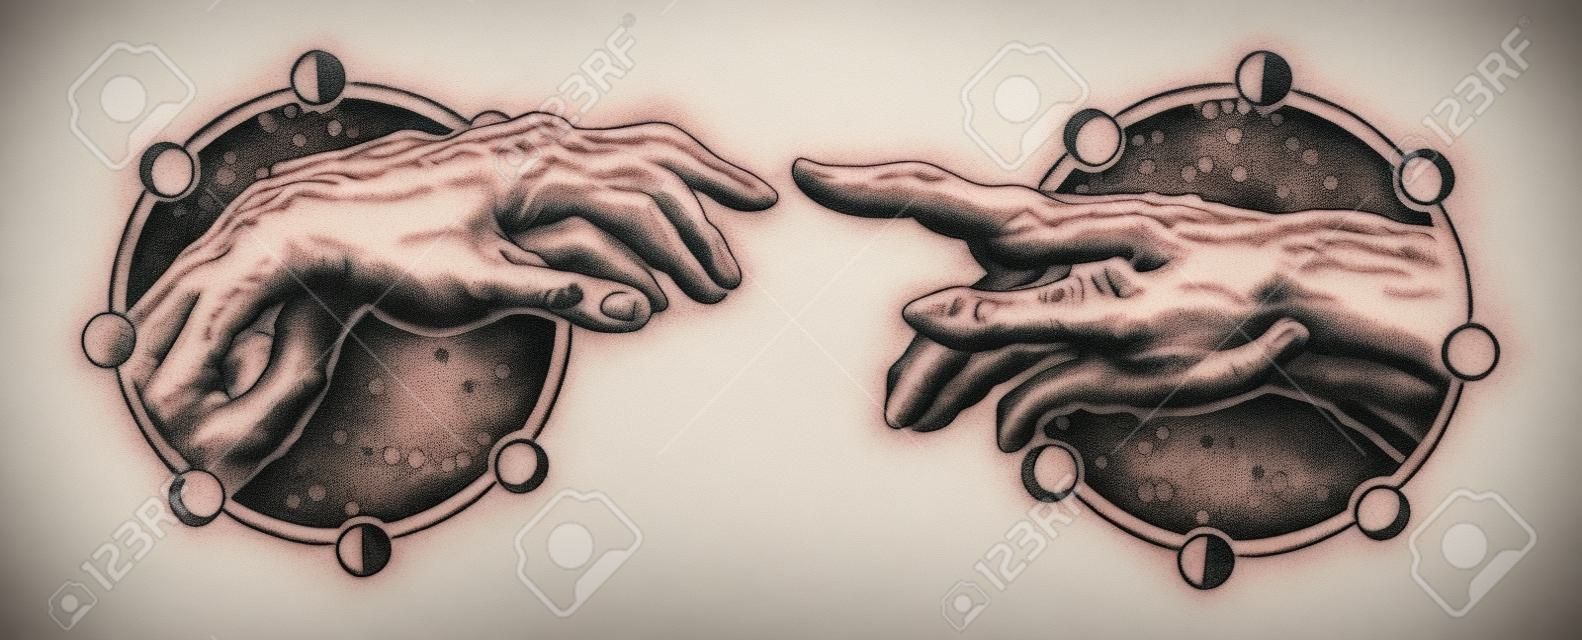 Michelangelo God's touch. Human hands touching with fingers tattoo and t-shirt design. Hands tattoo Renaissance. Gods and Adam, symbol of spirituality, religion, connection and interaction